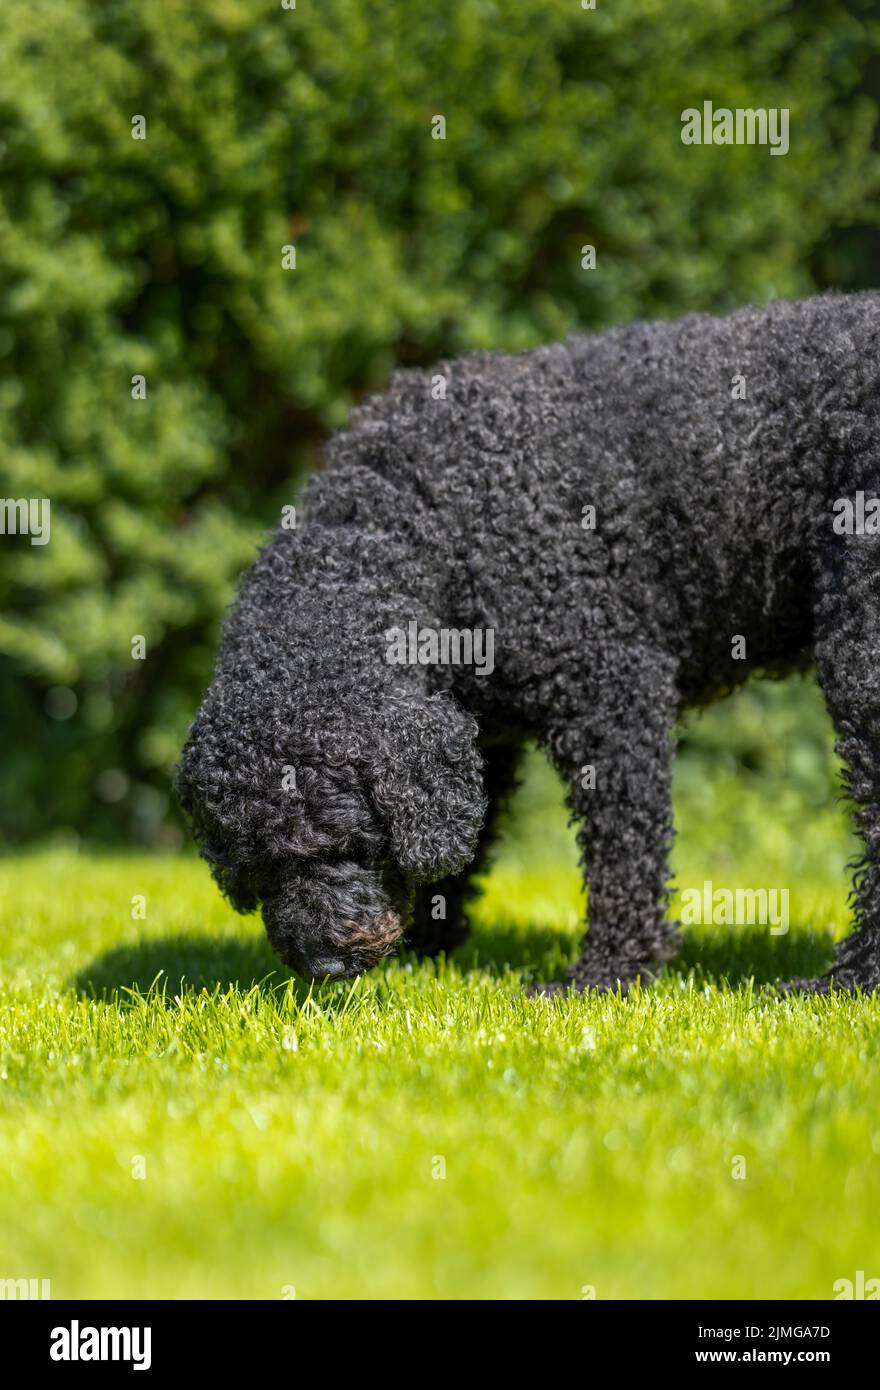 A beautiful curly haired black Labradoodle dog, sniffing a patch of lush green grass Stock Photo